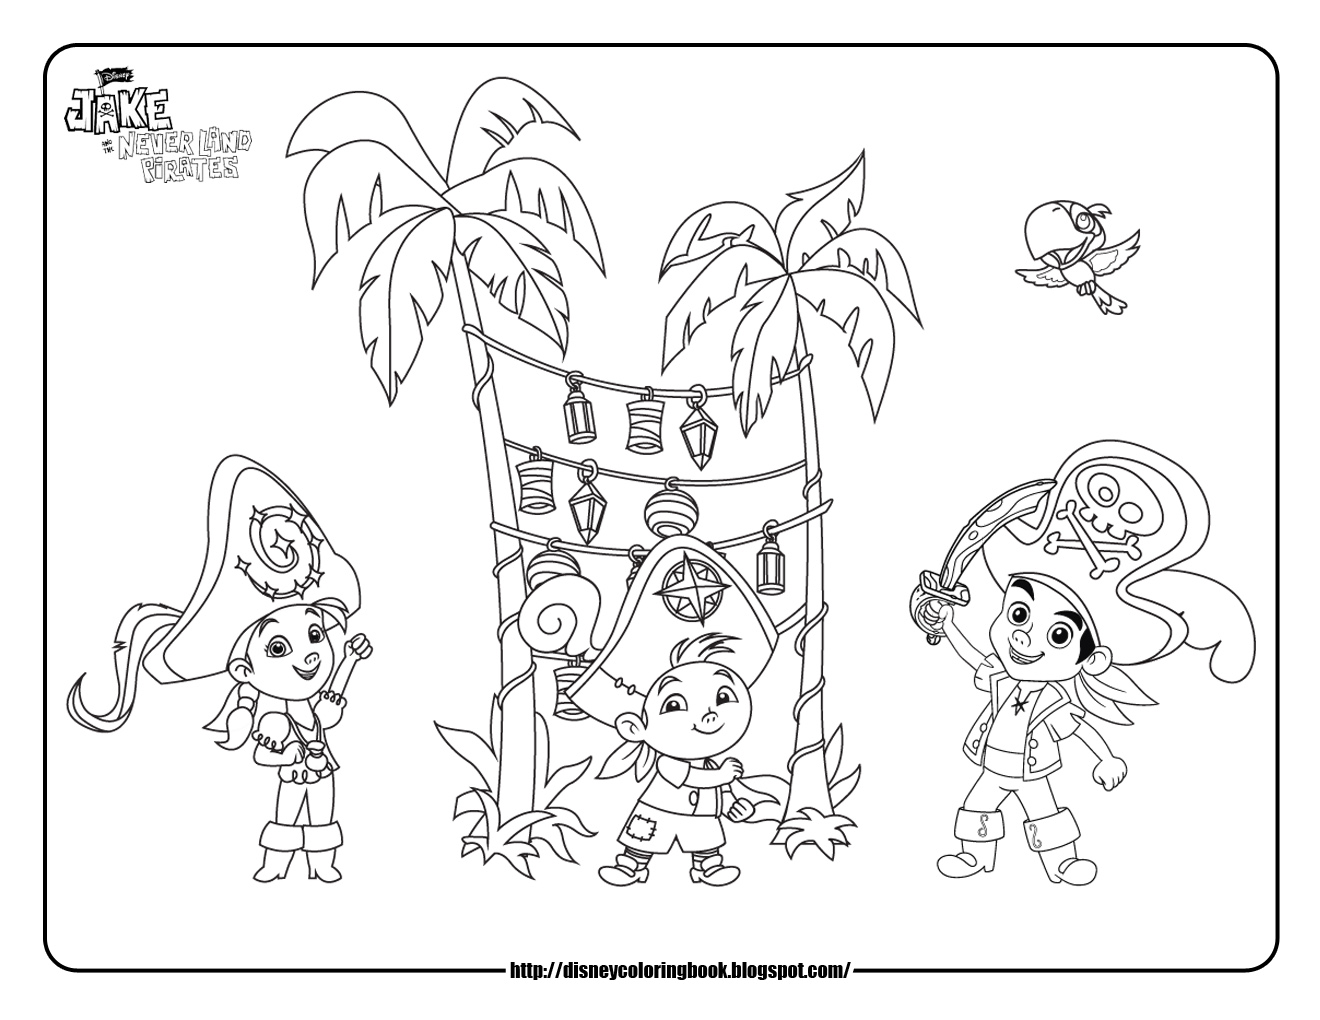 jake neverland pirates coloring pages print - photo #4